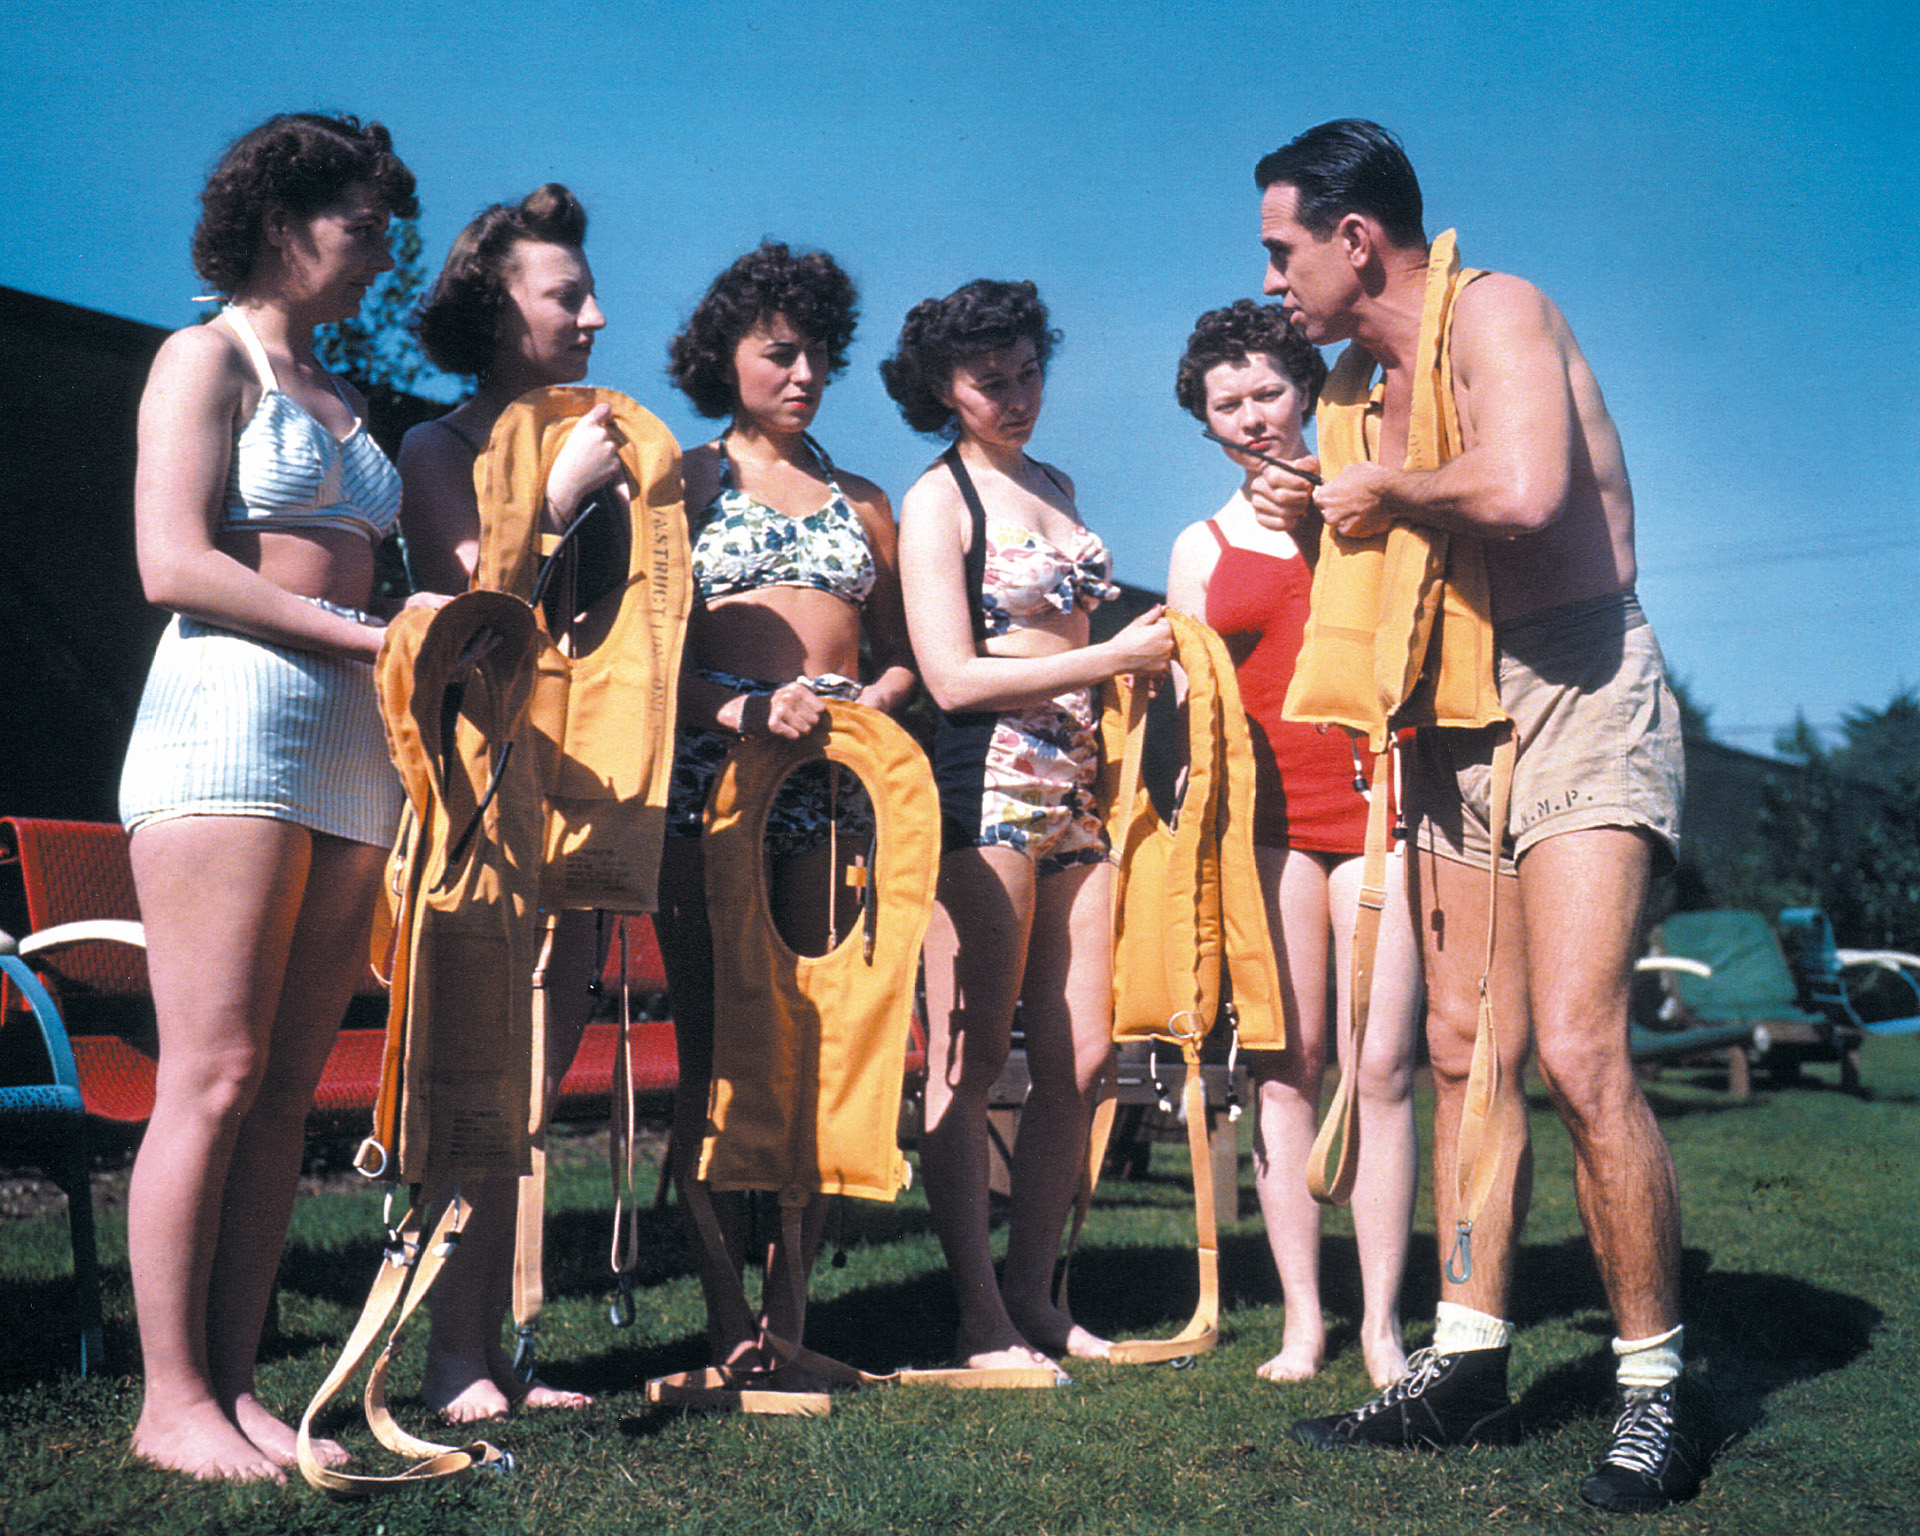 A Navy instructor explains a flotation device to some recruits wearing non-government issue swimsuits during “ditching procedure” training. It is not known whether women referred to the devices as “Mae Wests” as the men did.